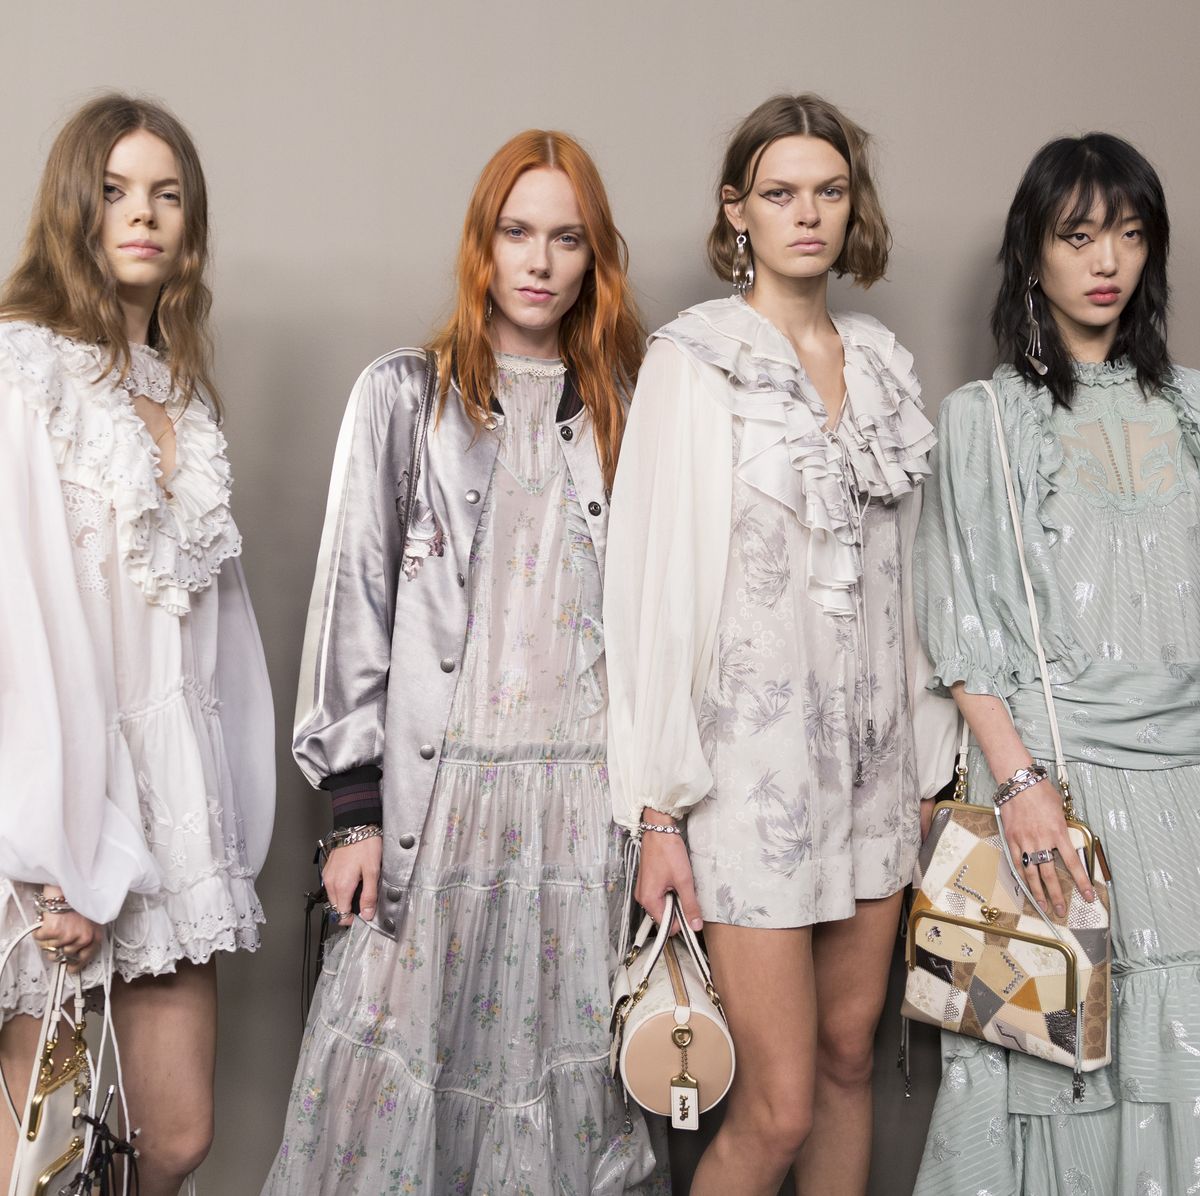 Coach's New York Fashion Week Show Was All About The Floaty Prairie Dress